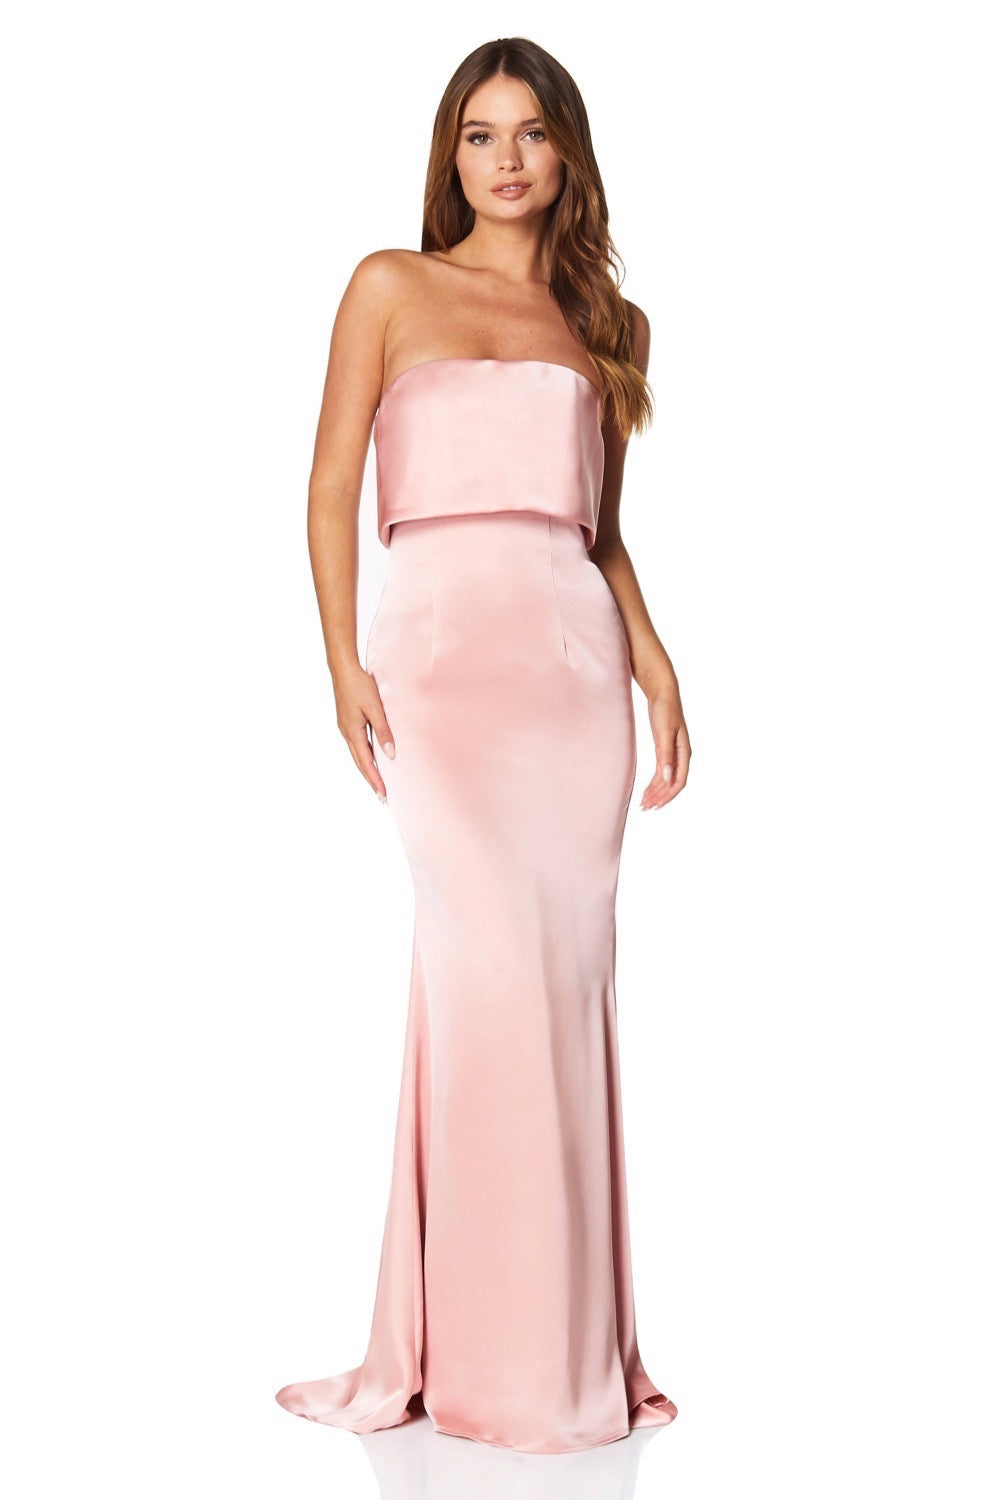 Jetaime Strapless Maxi Dress with Overlay and Button Back Detail, UK 6 / US 2 / EU 34 / Blush